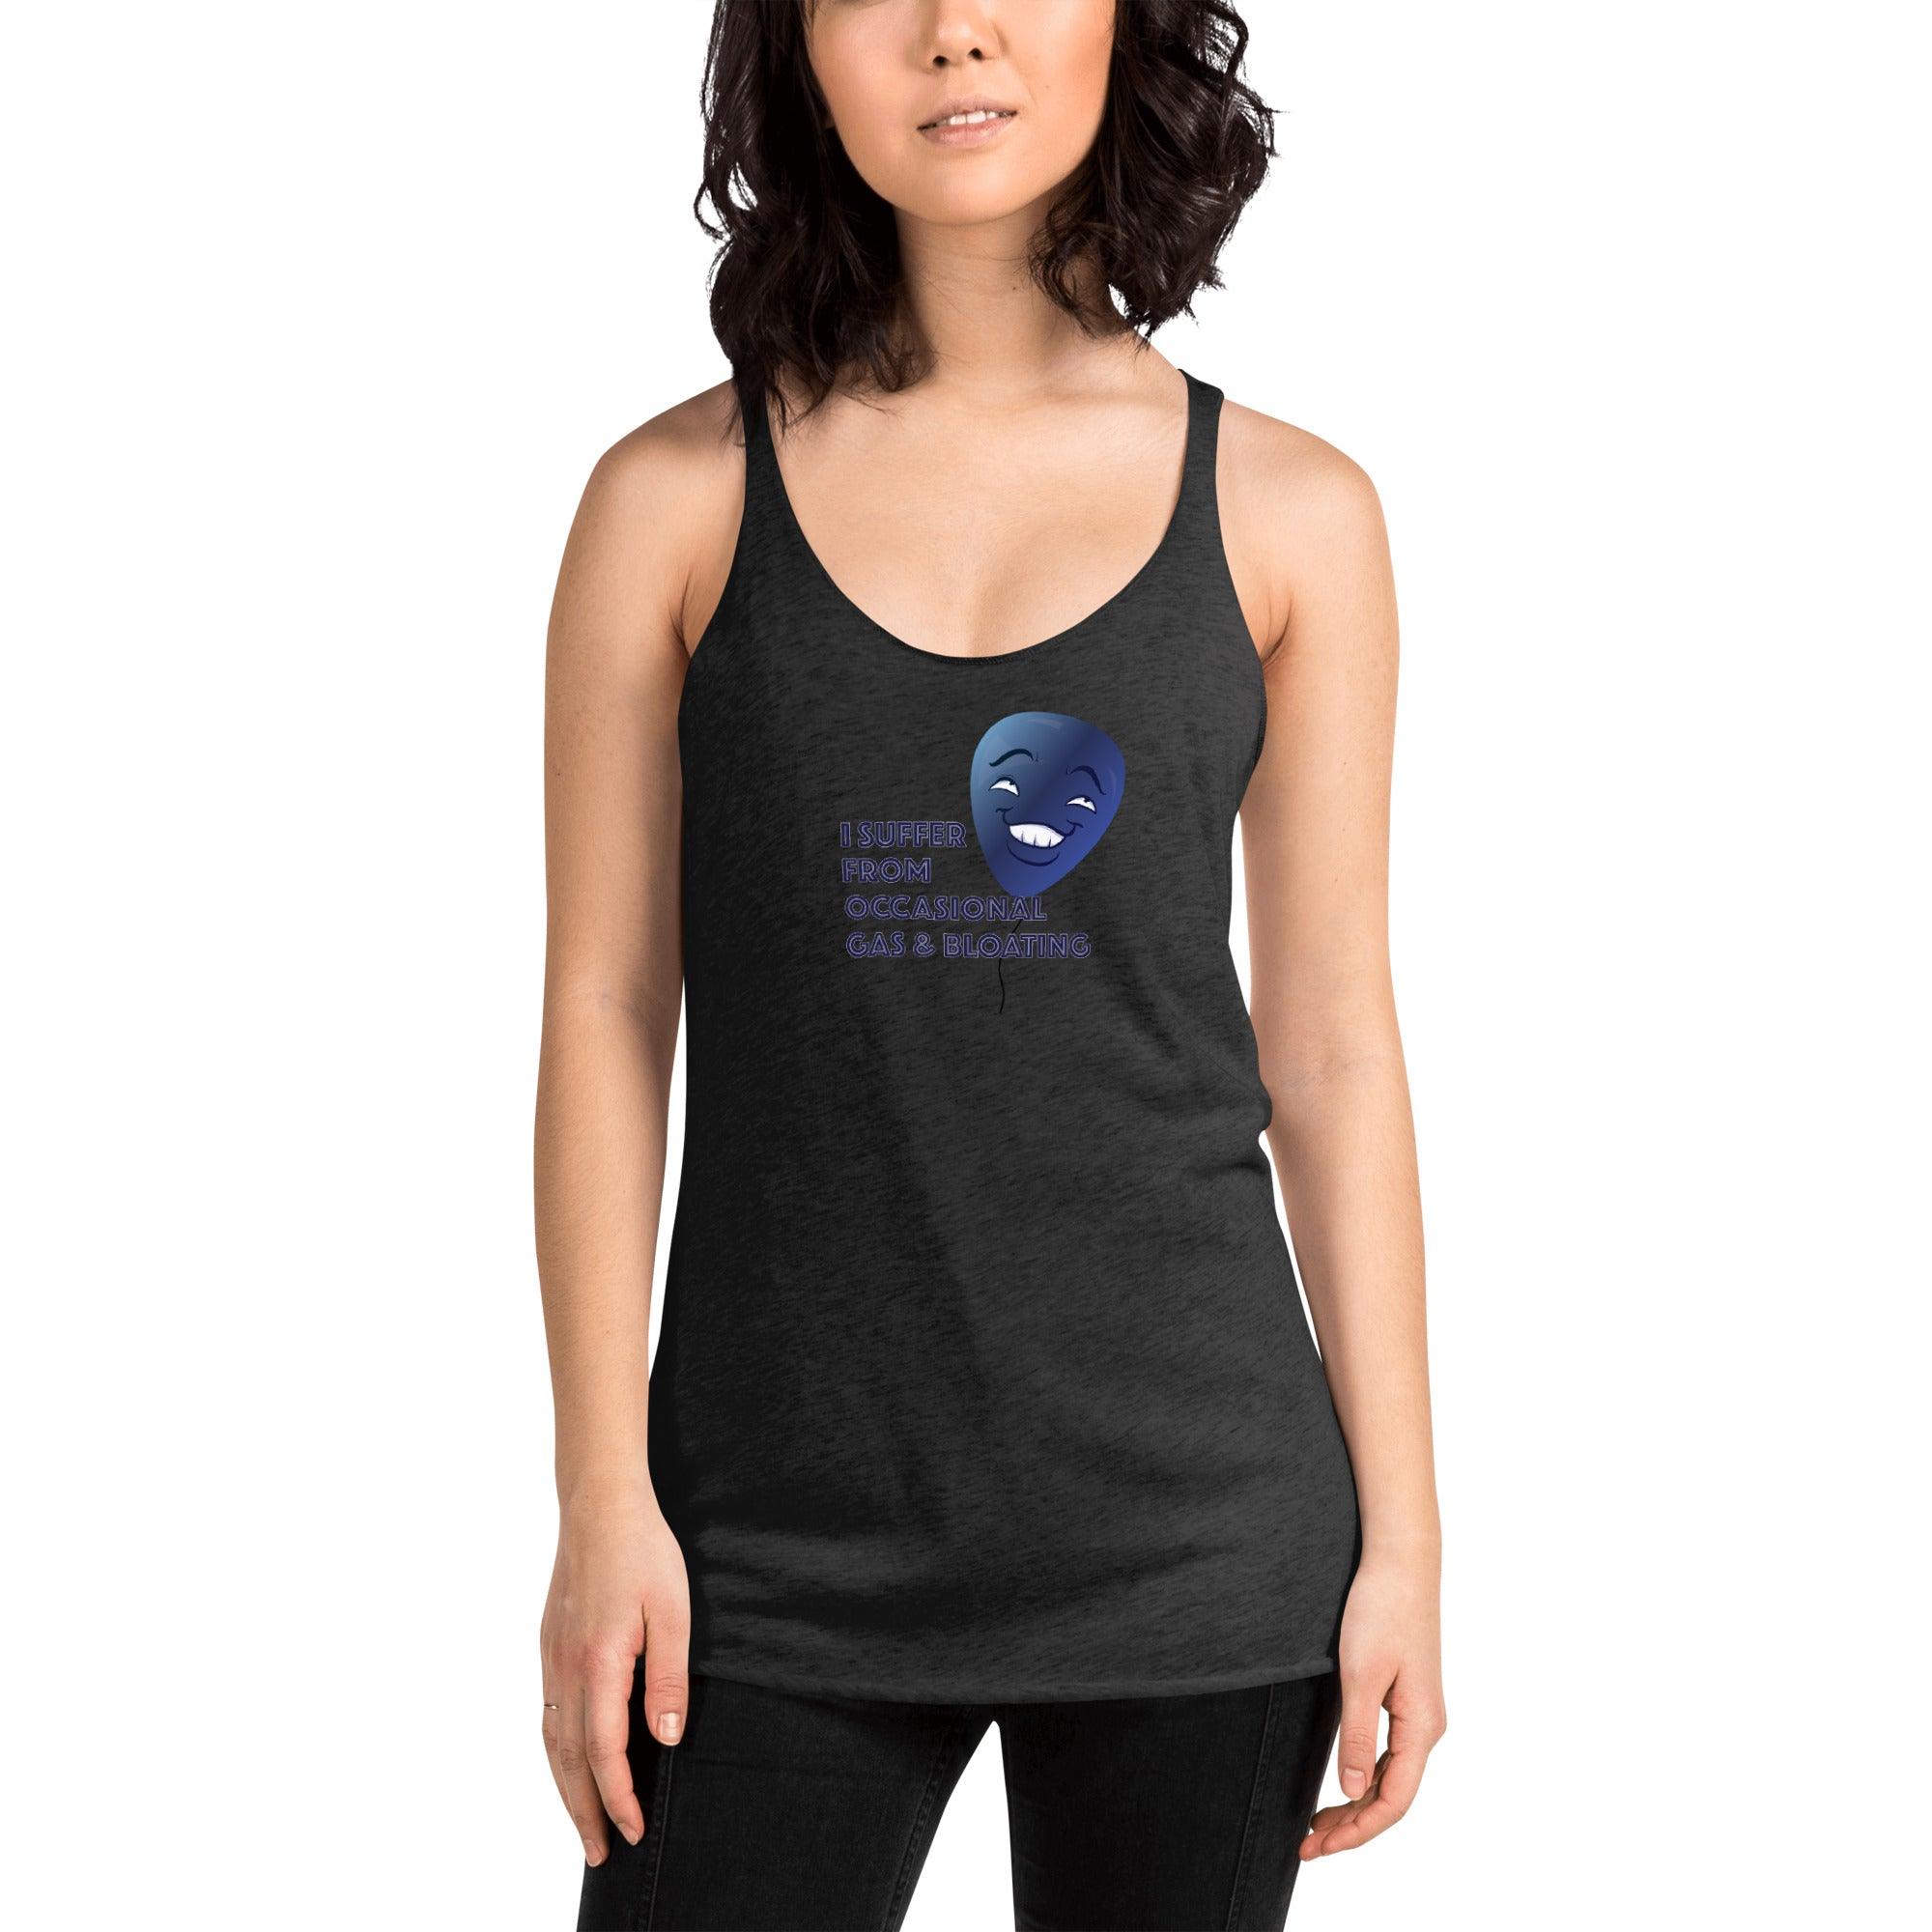 I Suffer From Occasional Gas and Bloating  Women's Racerback Tank VAWDesigns